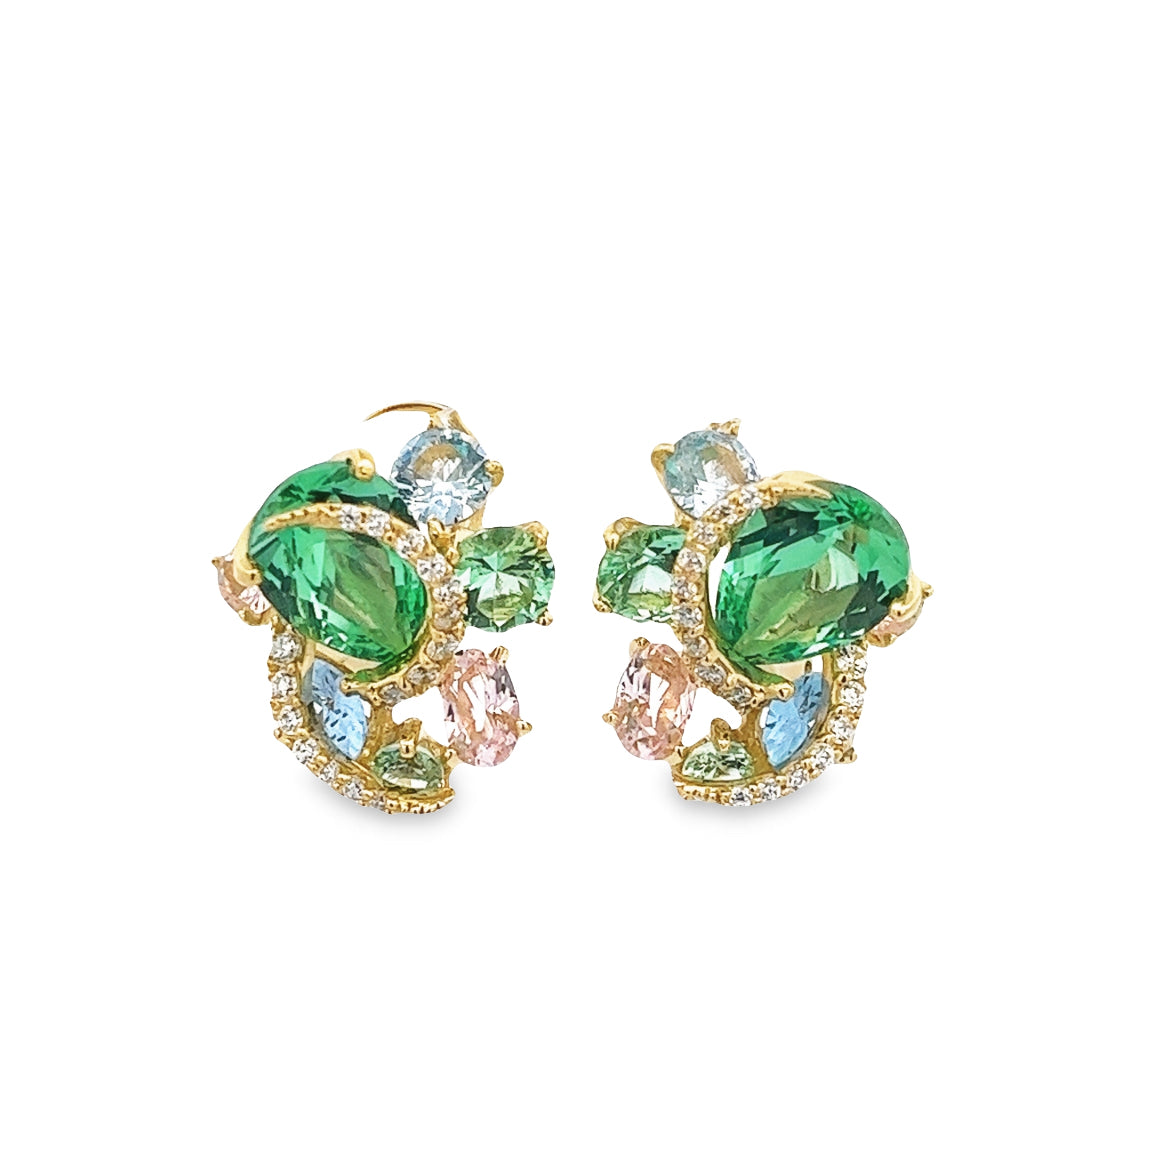 925 SILVER GOLD PLATED EARRINGS SILVER WITH TOURMALINE GREEN AND AQUABLUE MAGANITE PINK